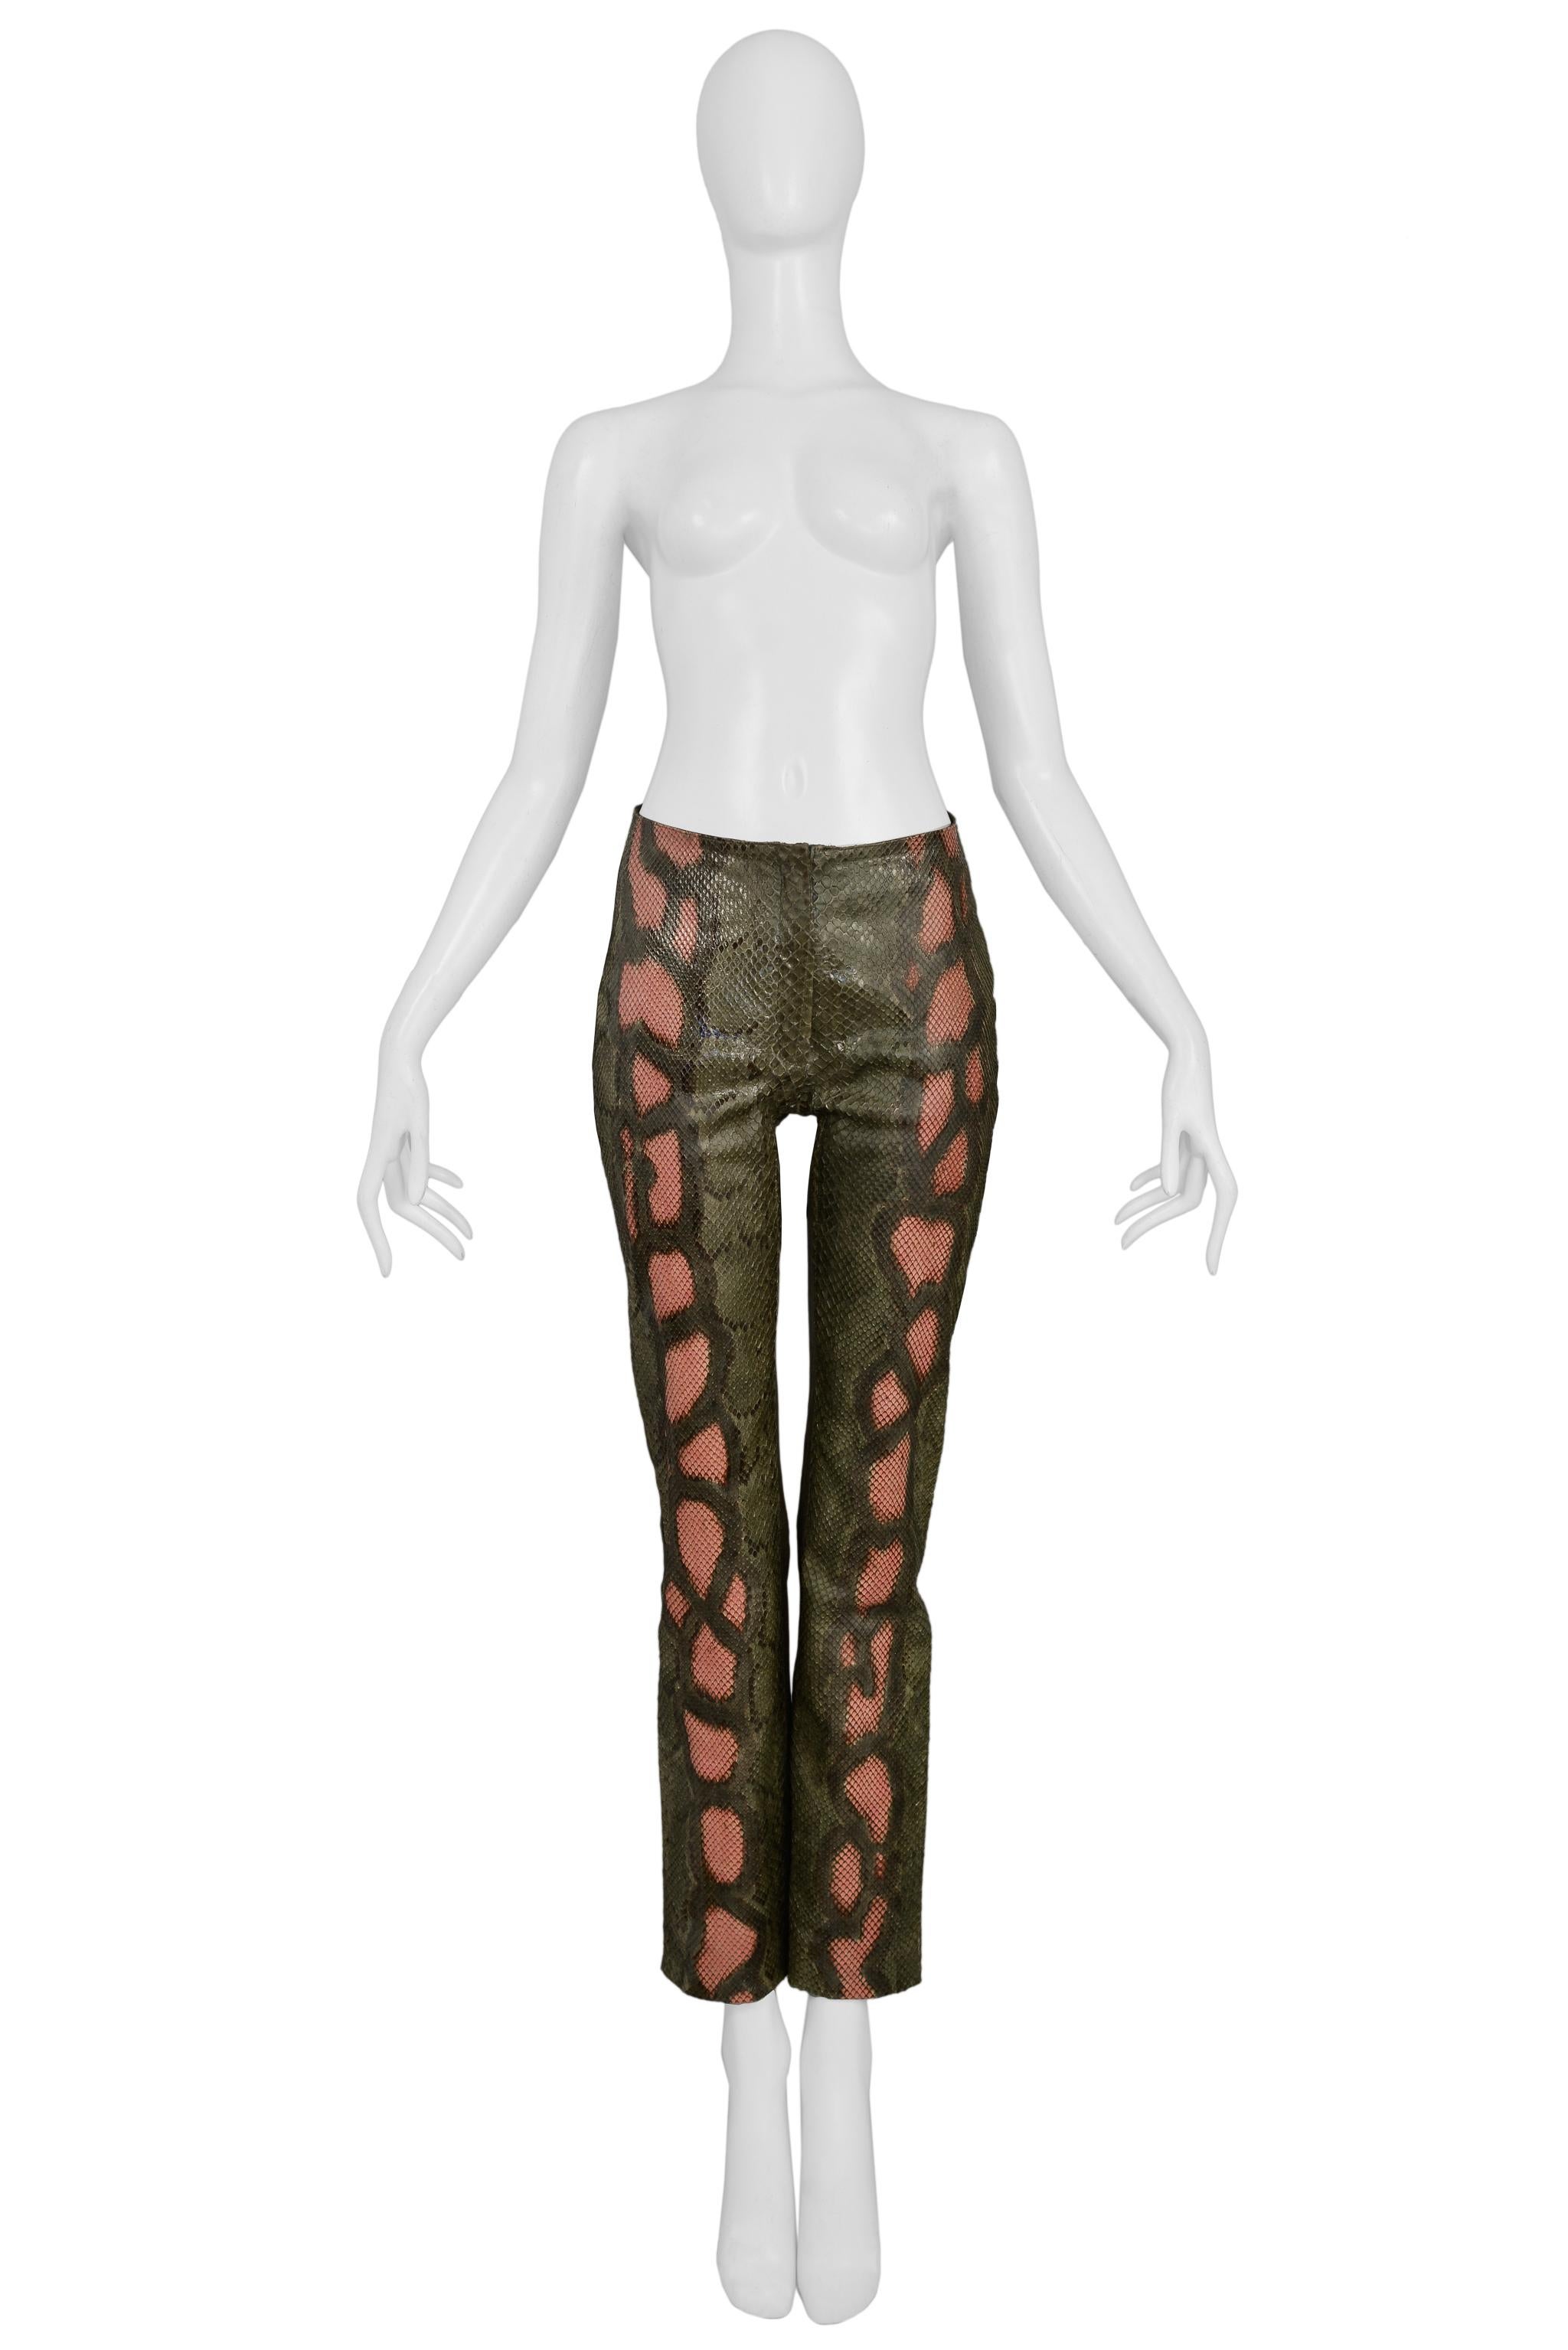 Resurrection Vintage is excited to offer a pair of vintage Jean-Claude Jitrois green and pink python leather pants featuring a center front zipper, front panel lining, slim fit, and a leather back panel. Appear unworn. 

Jitrois, Paris
Size: